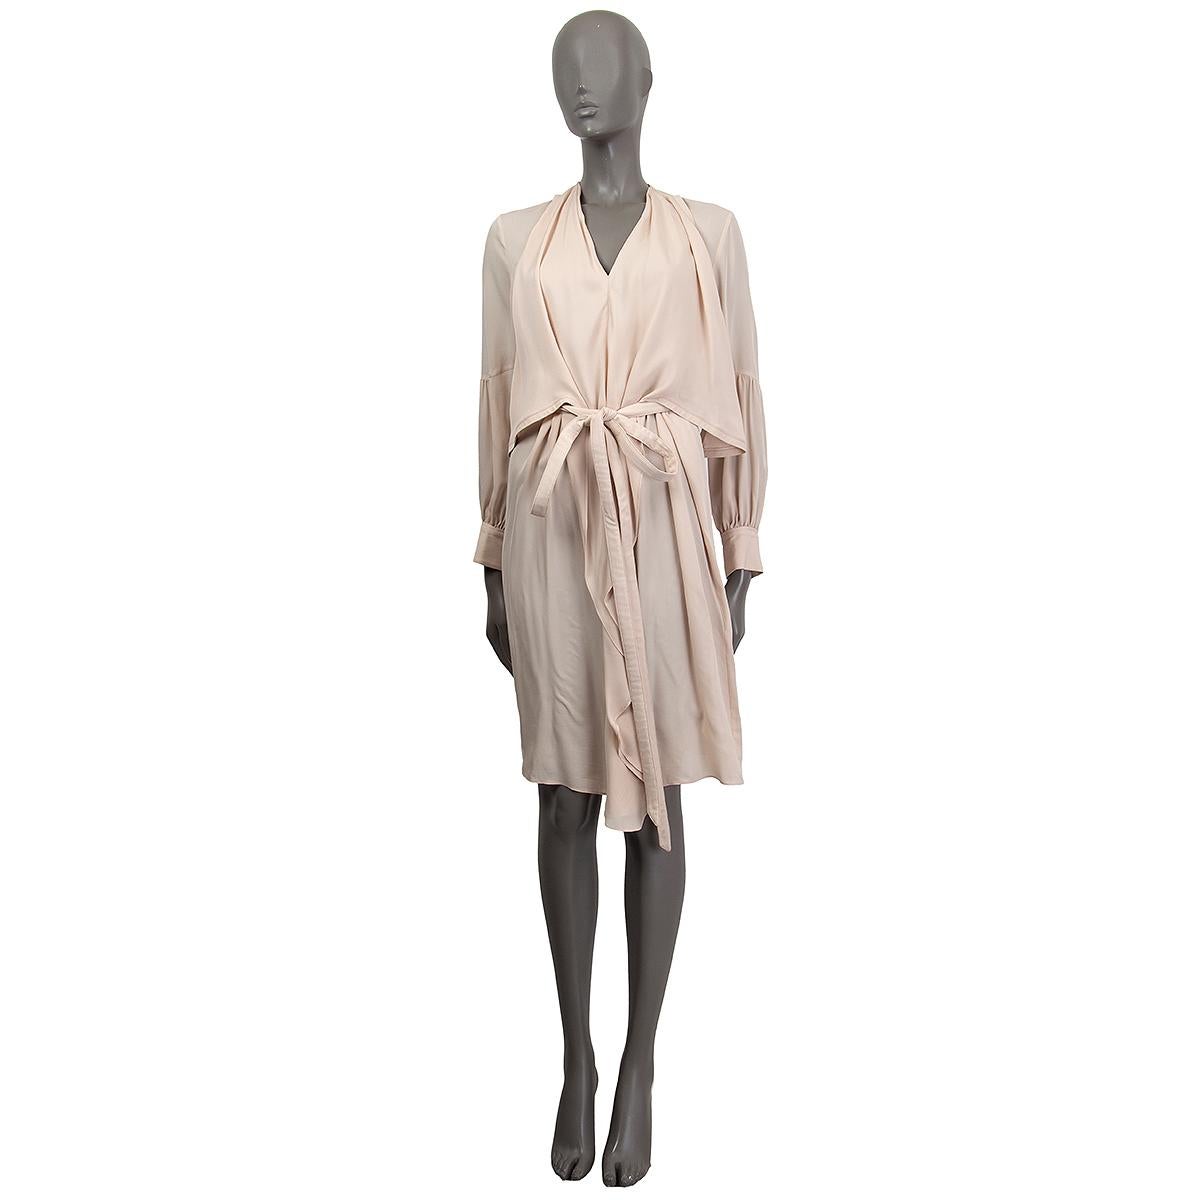 100% authentic Givenchy long sleeve front drape dress in nude silk (100%) with a v-neck. Comes with a matching belt. Cuffs fasten with a button. Unlined. Slight pulling on fabric around the v-neck area, otherwise it is in overall good